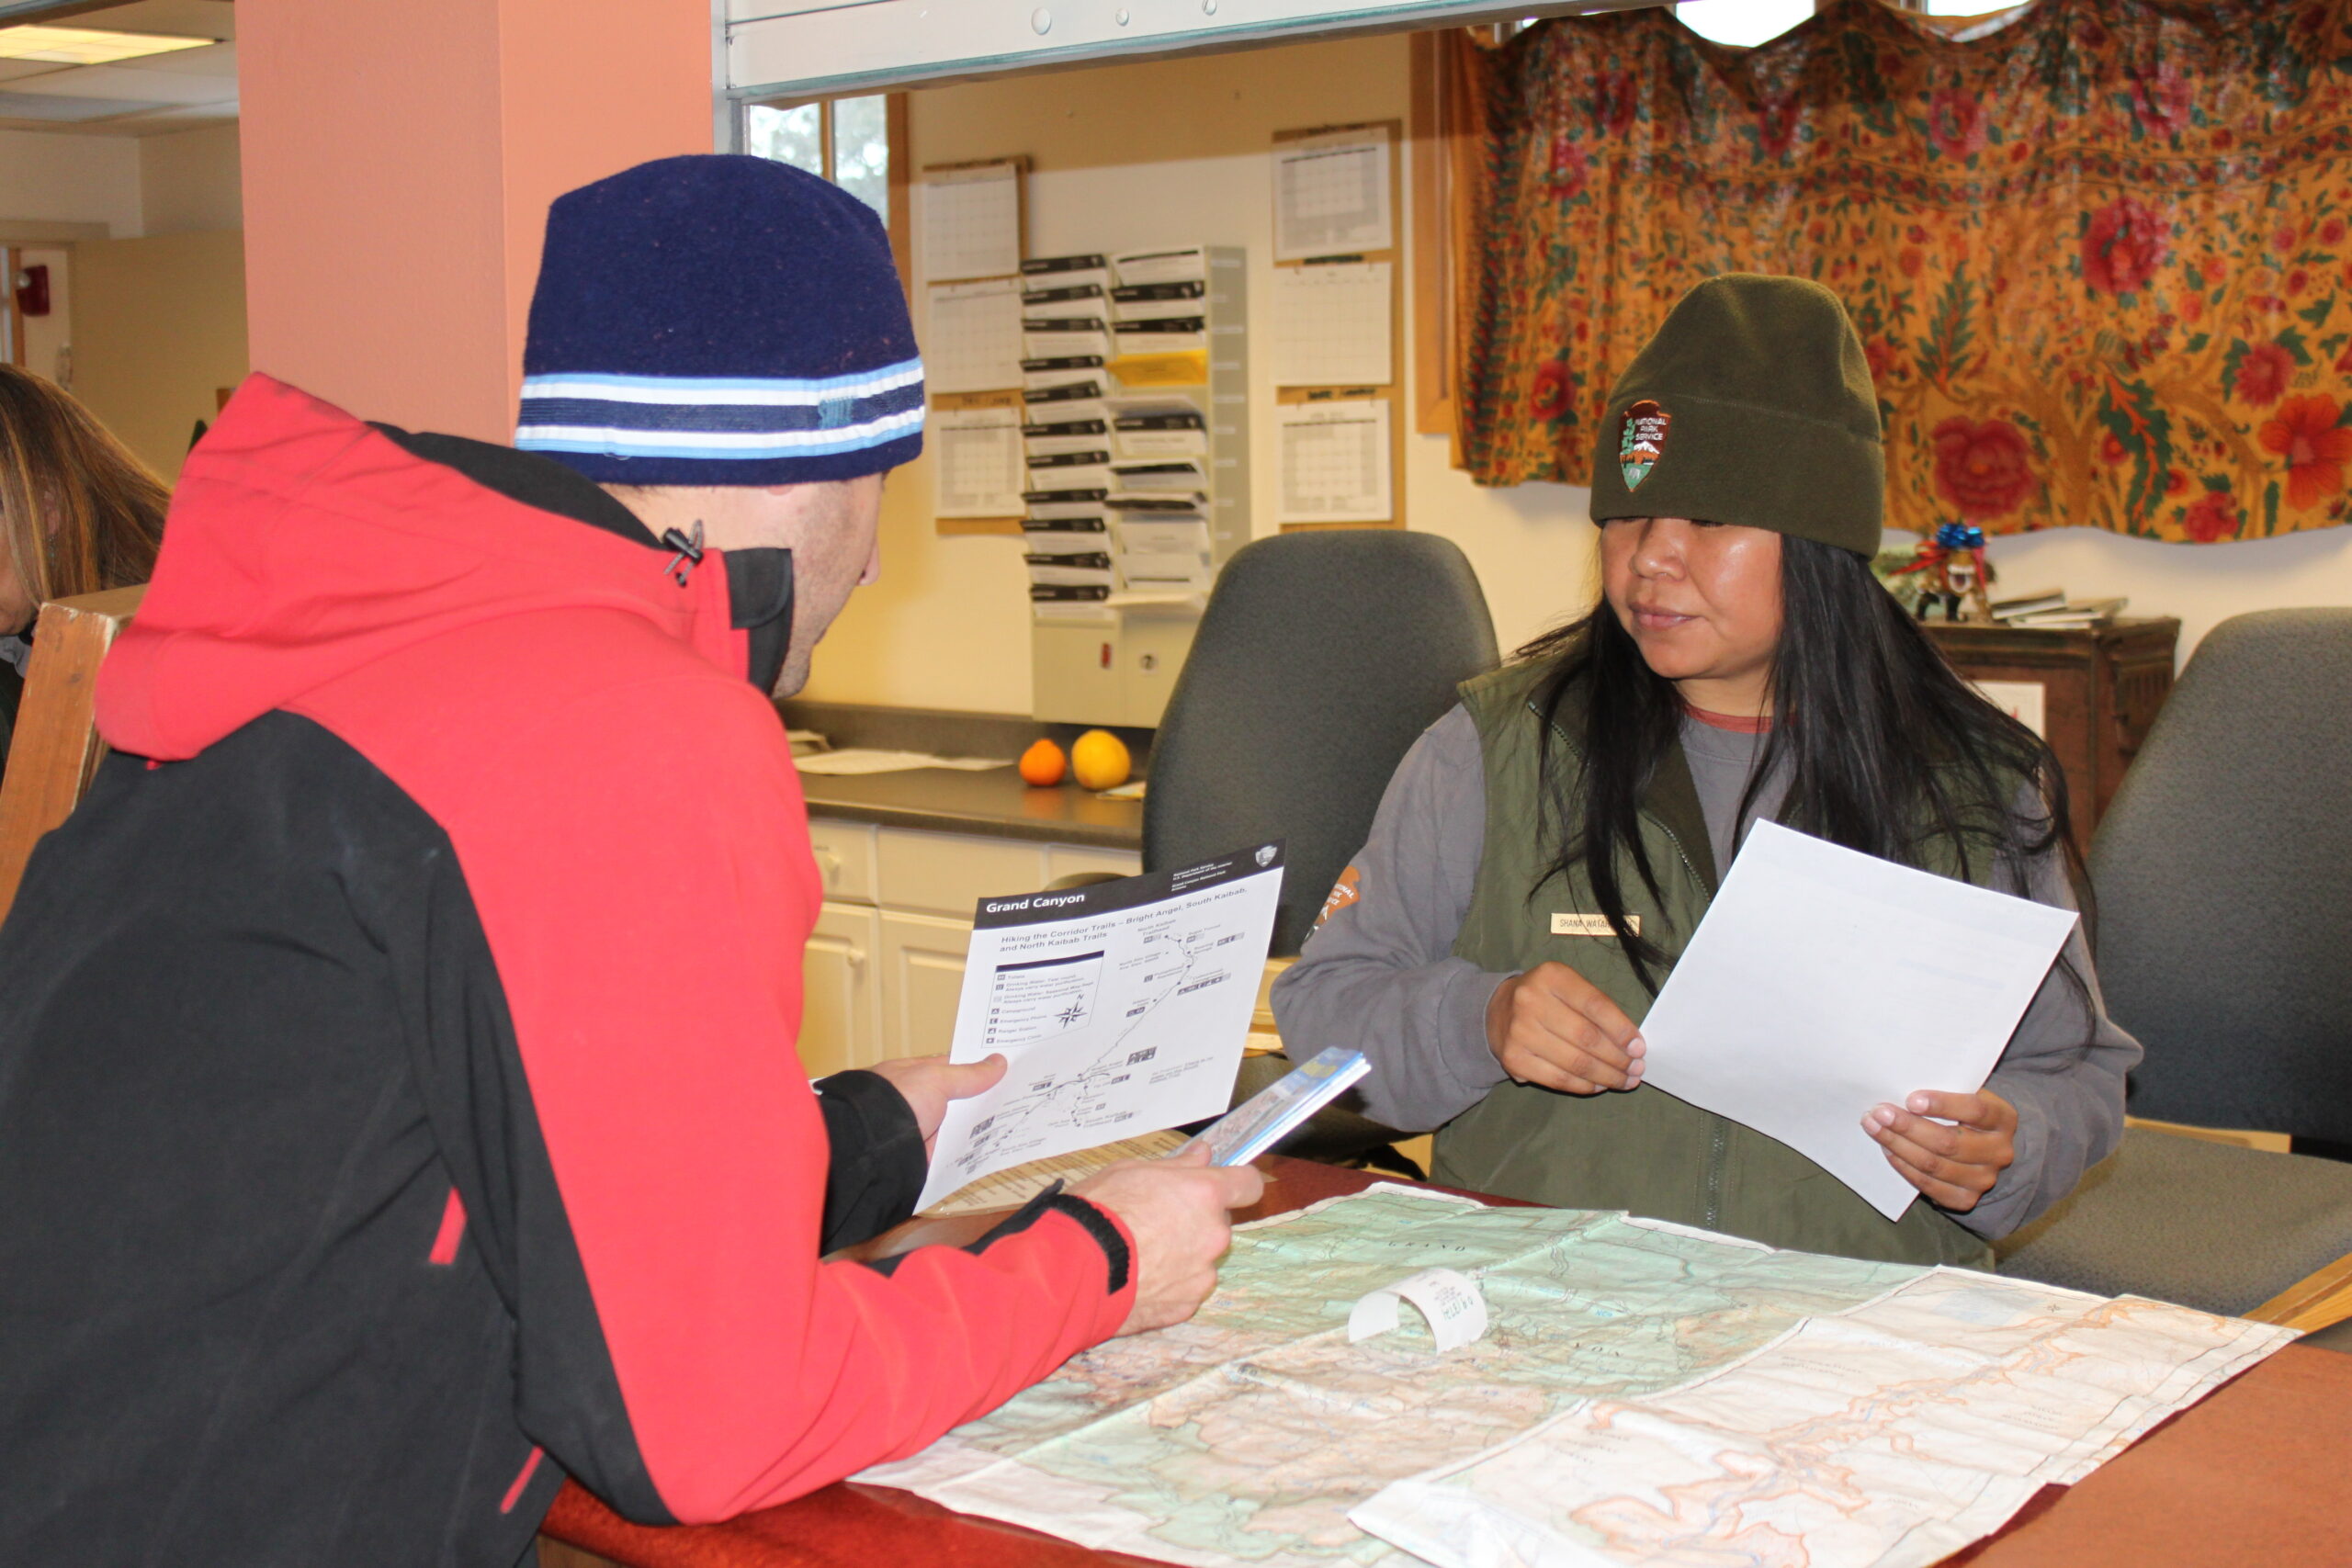 Hank discusses an itinerary with a Grand Canyon Park Ranger at the Backcountry Information Center.